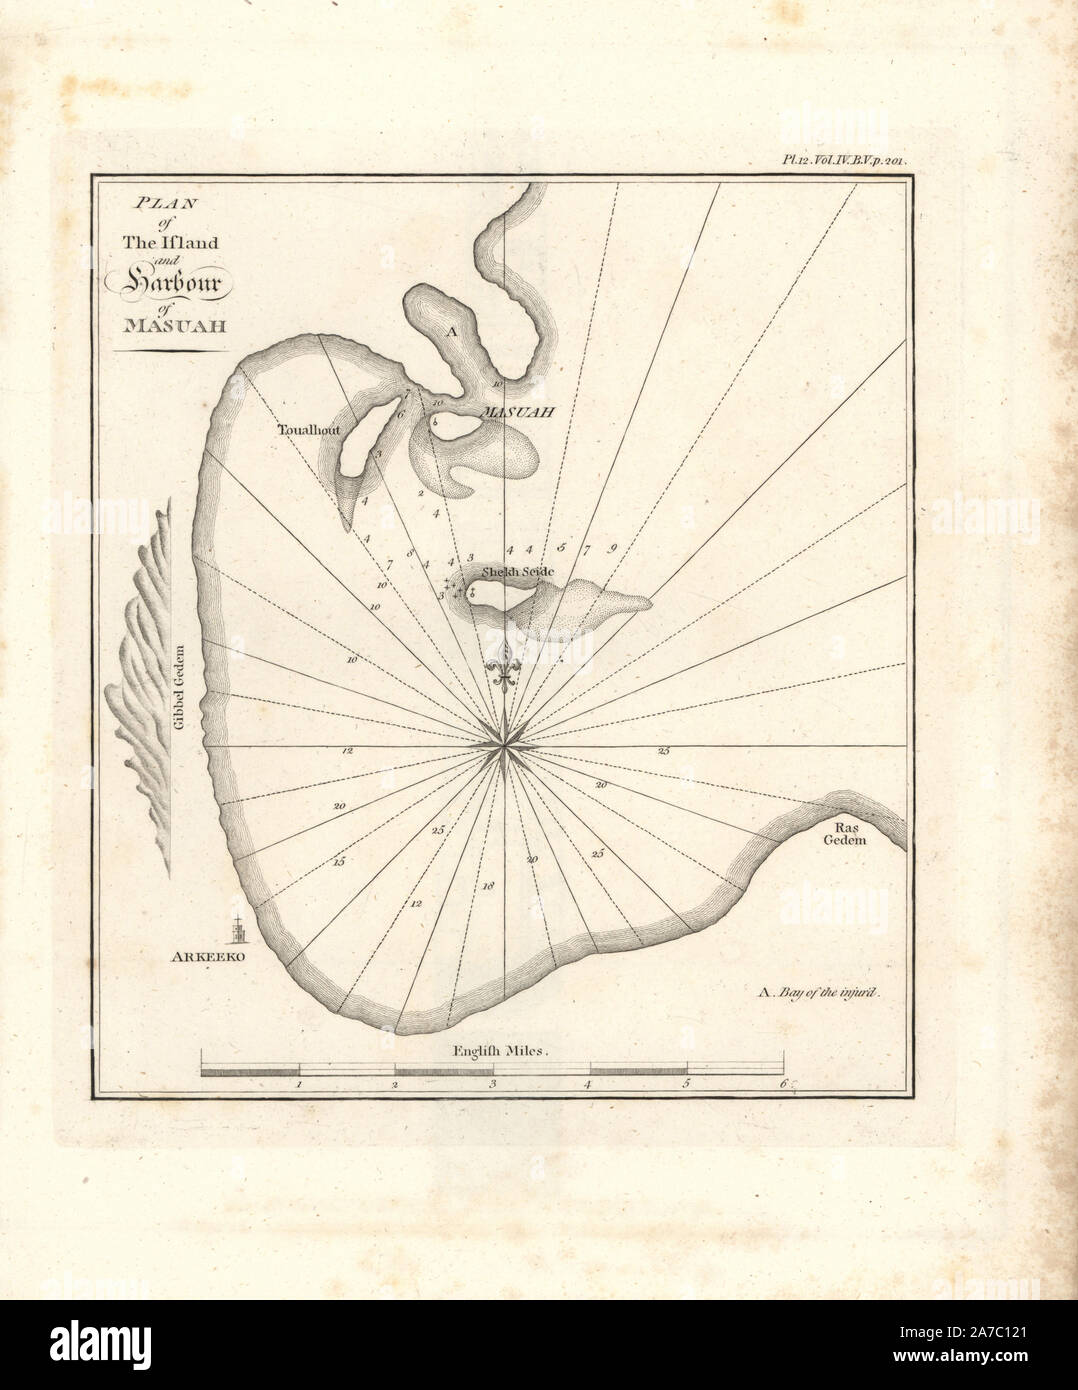 Plan of the island and harbour of Masuah (Massawa) on the Red Sea. Copperplate engraving from James Bruce's 'Travels to Discover the Source of the Nile, in the years 1768, 1769, 1770, 1771, 1772 and 1773,' London, 1790. James Bruce (1730-1794) was a Scottish explorer and travel writer who spent more than 12 years in North Africa and Ethiopia. Engraved by Heath after an original drawing by Bruce. Stock Photo